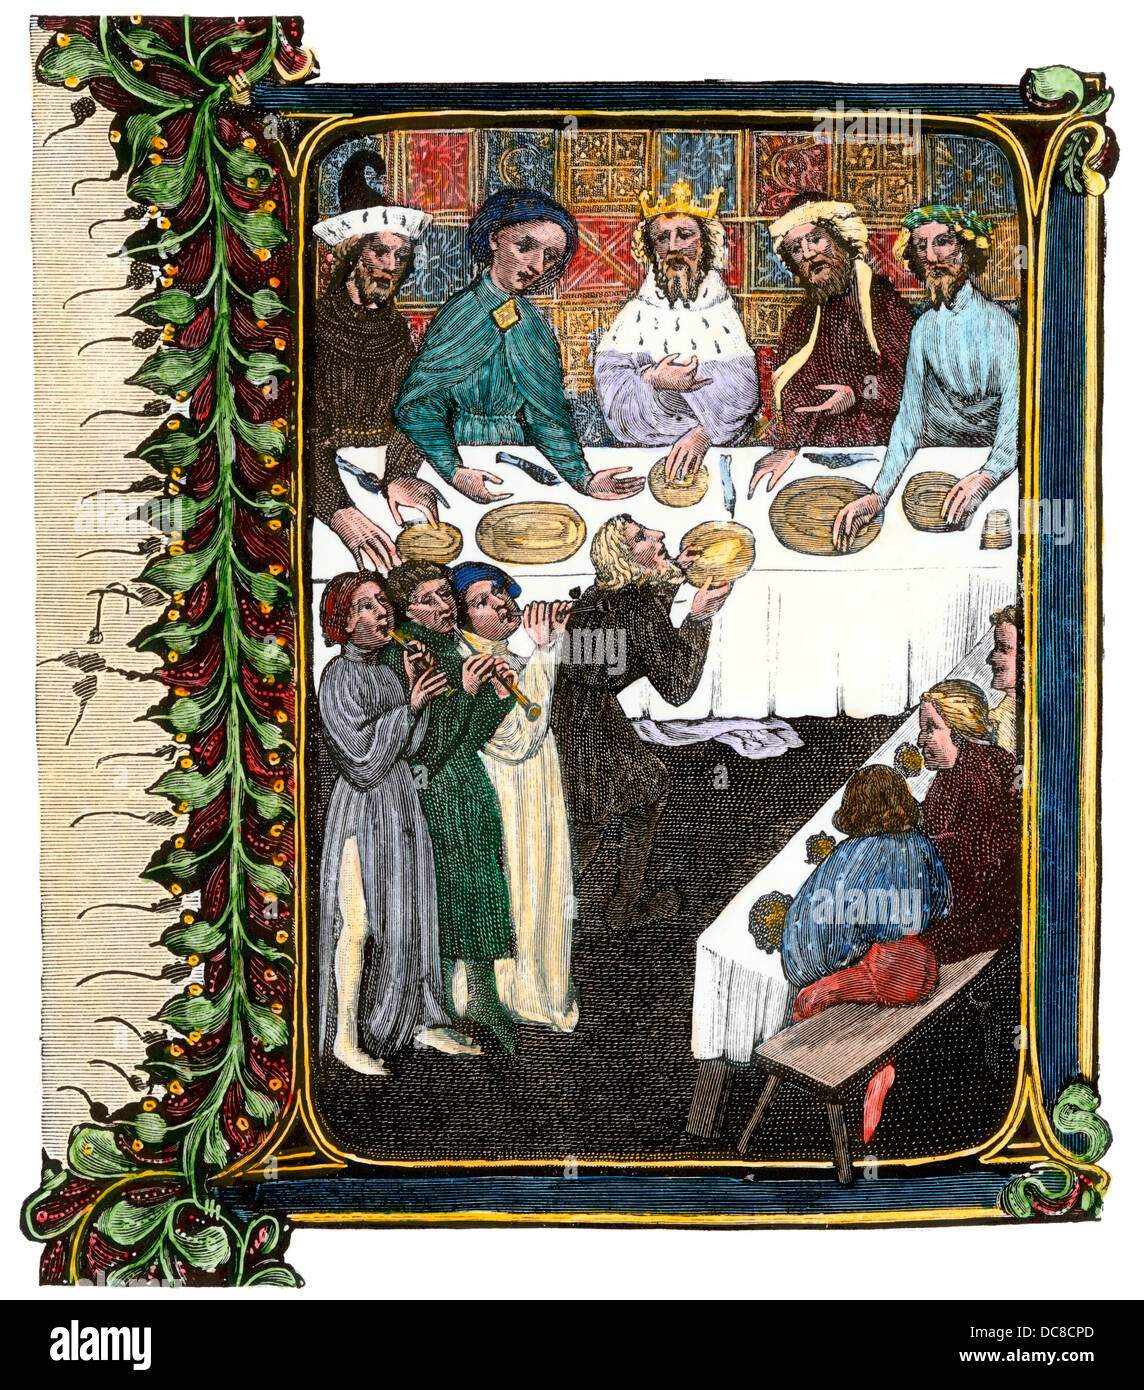 Royal banquet in the early 15th century, from an illuminated manuscript. Hand-colored woodcut reproduction Stock Photo